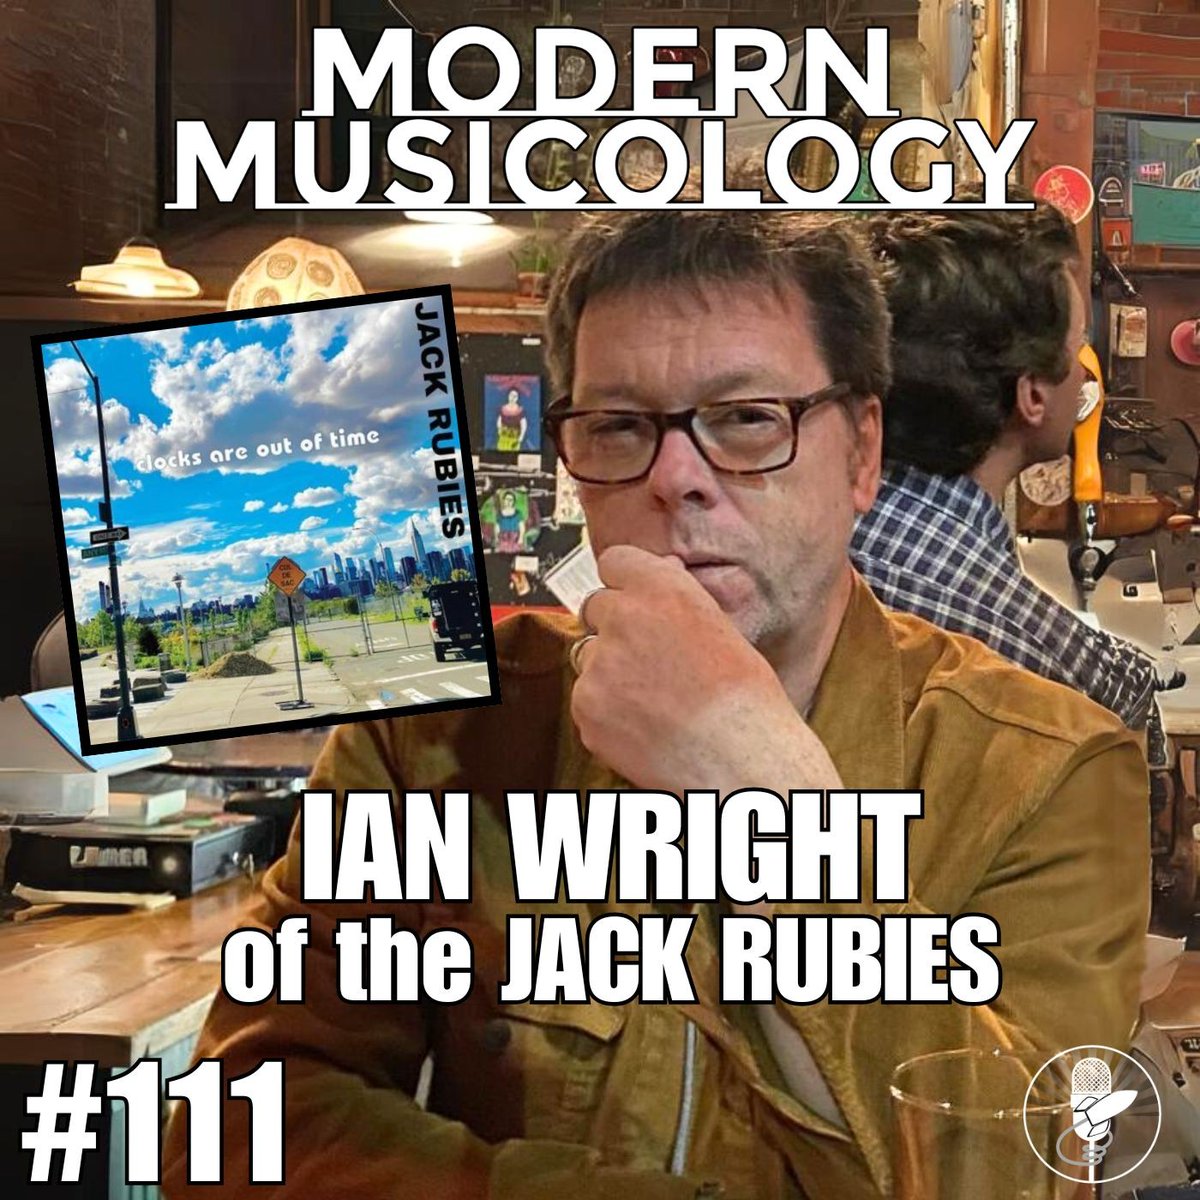 The Jack Rubies at the Modern Musicology Podcast, covering the band's whole career. The new album 'Clocks Are Out Of Time' and back catalog are out now (orcd.co/jackrubies-cao…) from Big Stir Records! modernmusicology1.podbean.com/e/ian-wright-o… #ModernMusicology #TheJackRubies #IndieRock #PostPunk